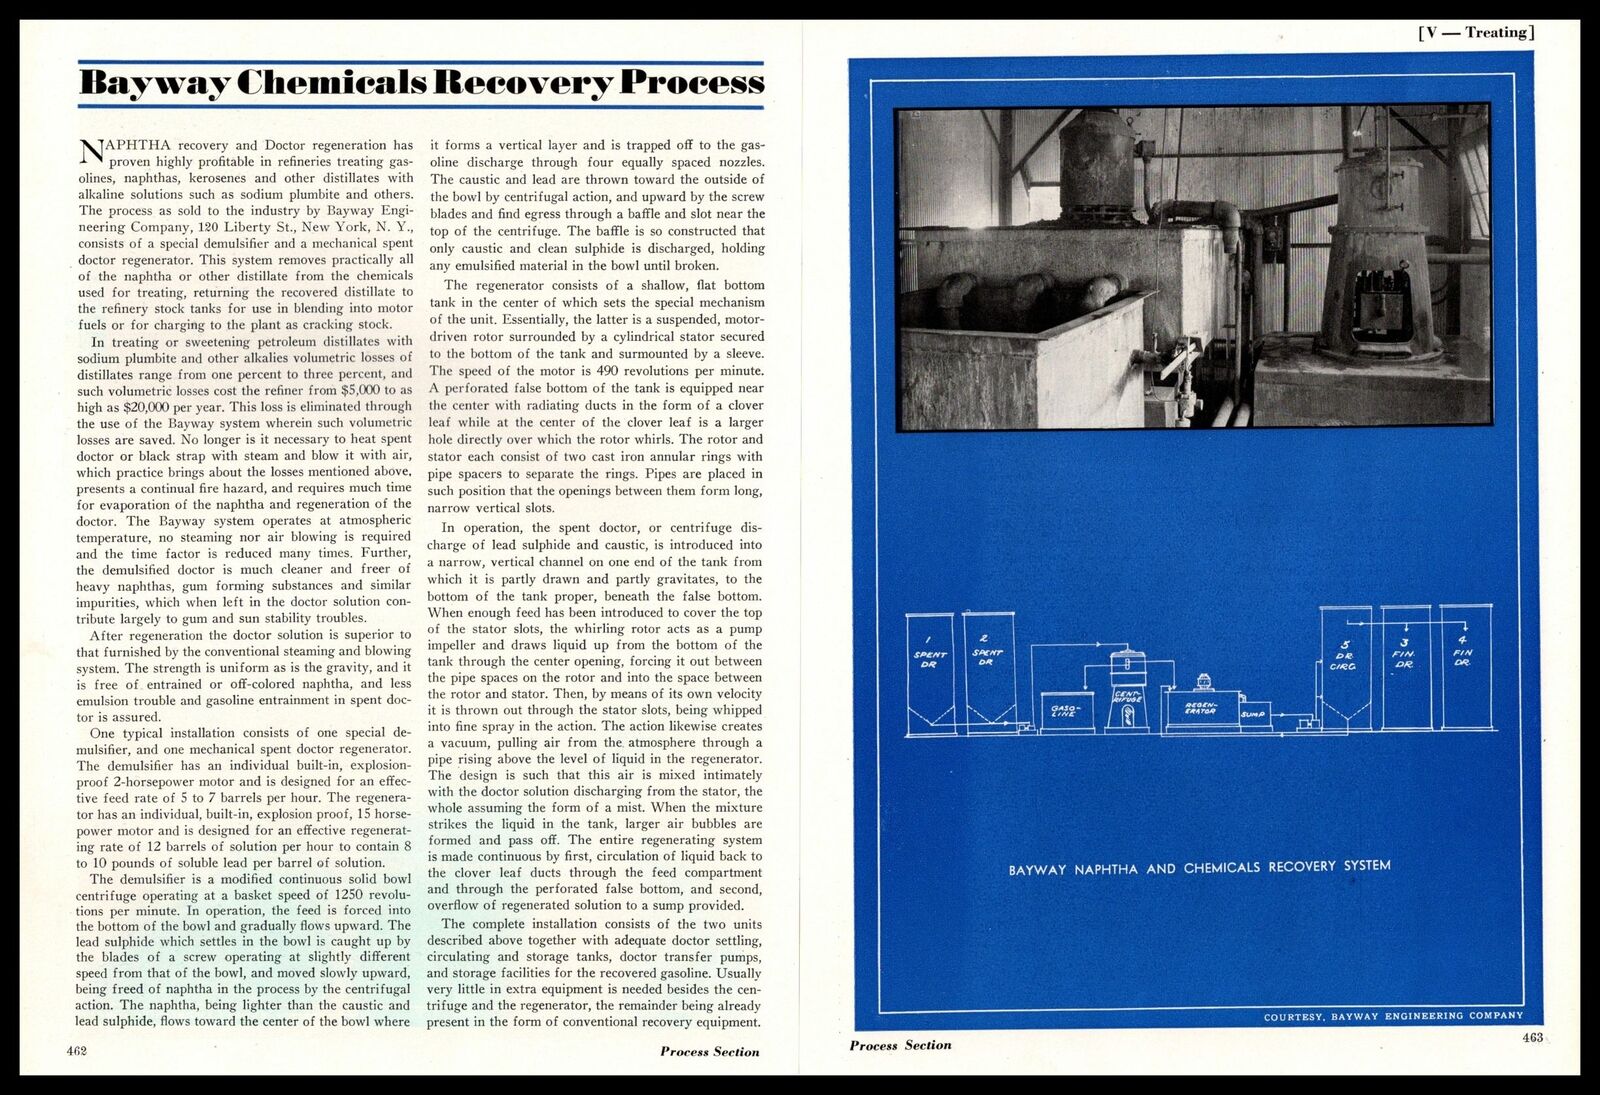 1939 Bayway Engineering Chemical Recovery System Diagram Article 2-Page Print Ad